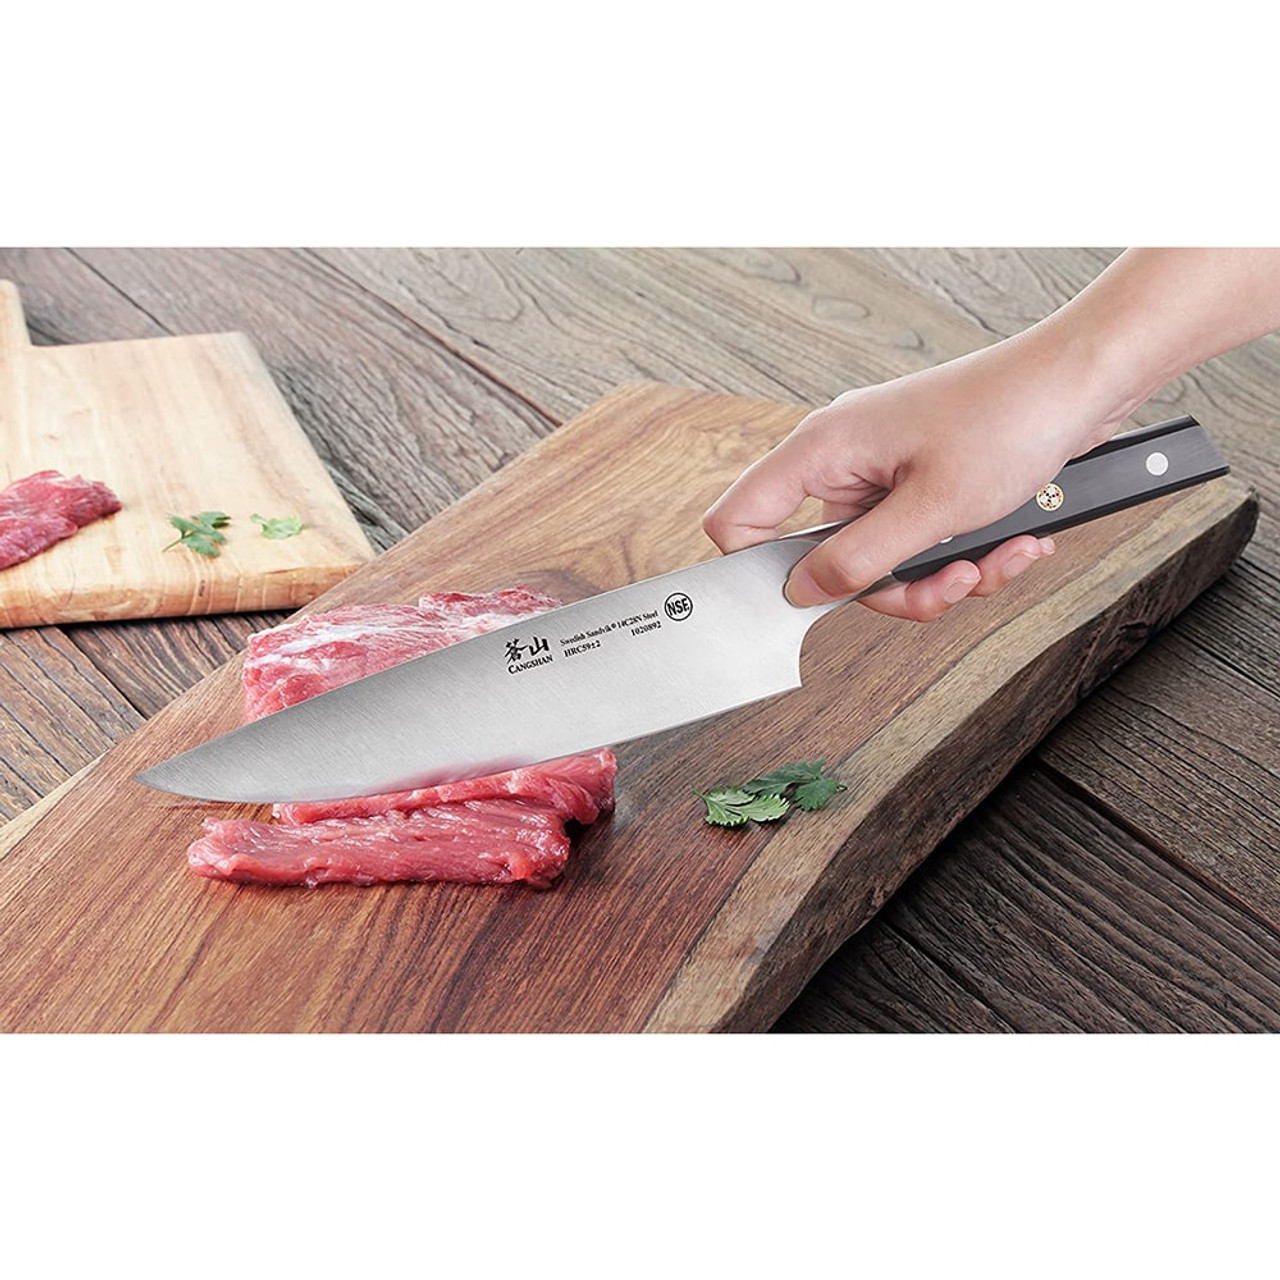 https://cdn11.bigcommerce.com/s-hccytny0od/images/stencil/1280x1280/products/4101/15305/cangshan-tc-series-chefs-knife-5__39612.1624760325.jpg?c=2?imbypass=on